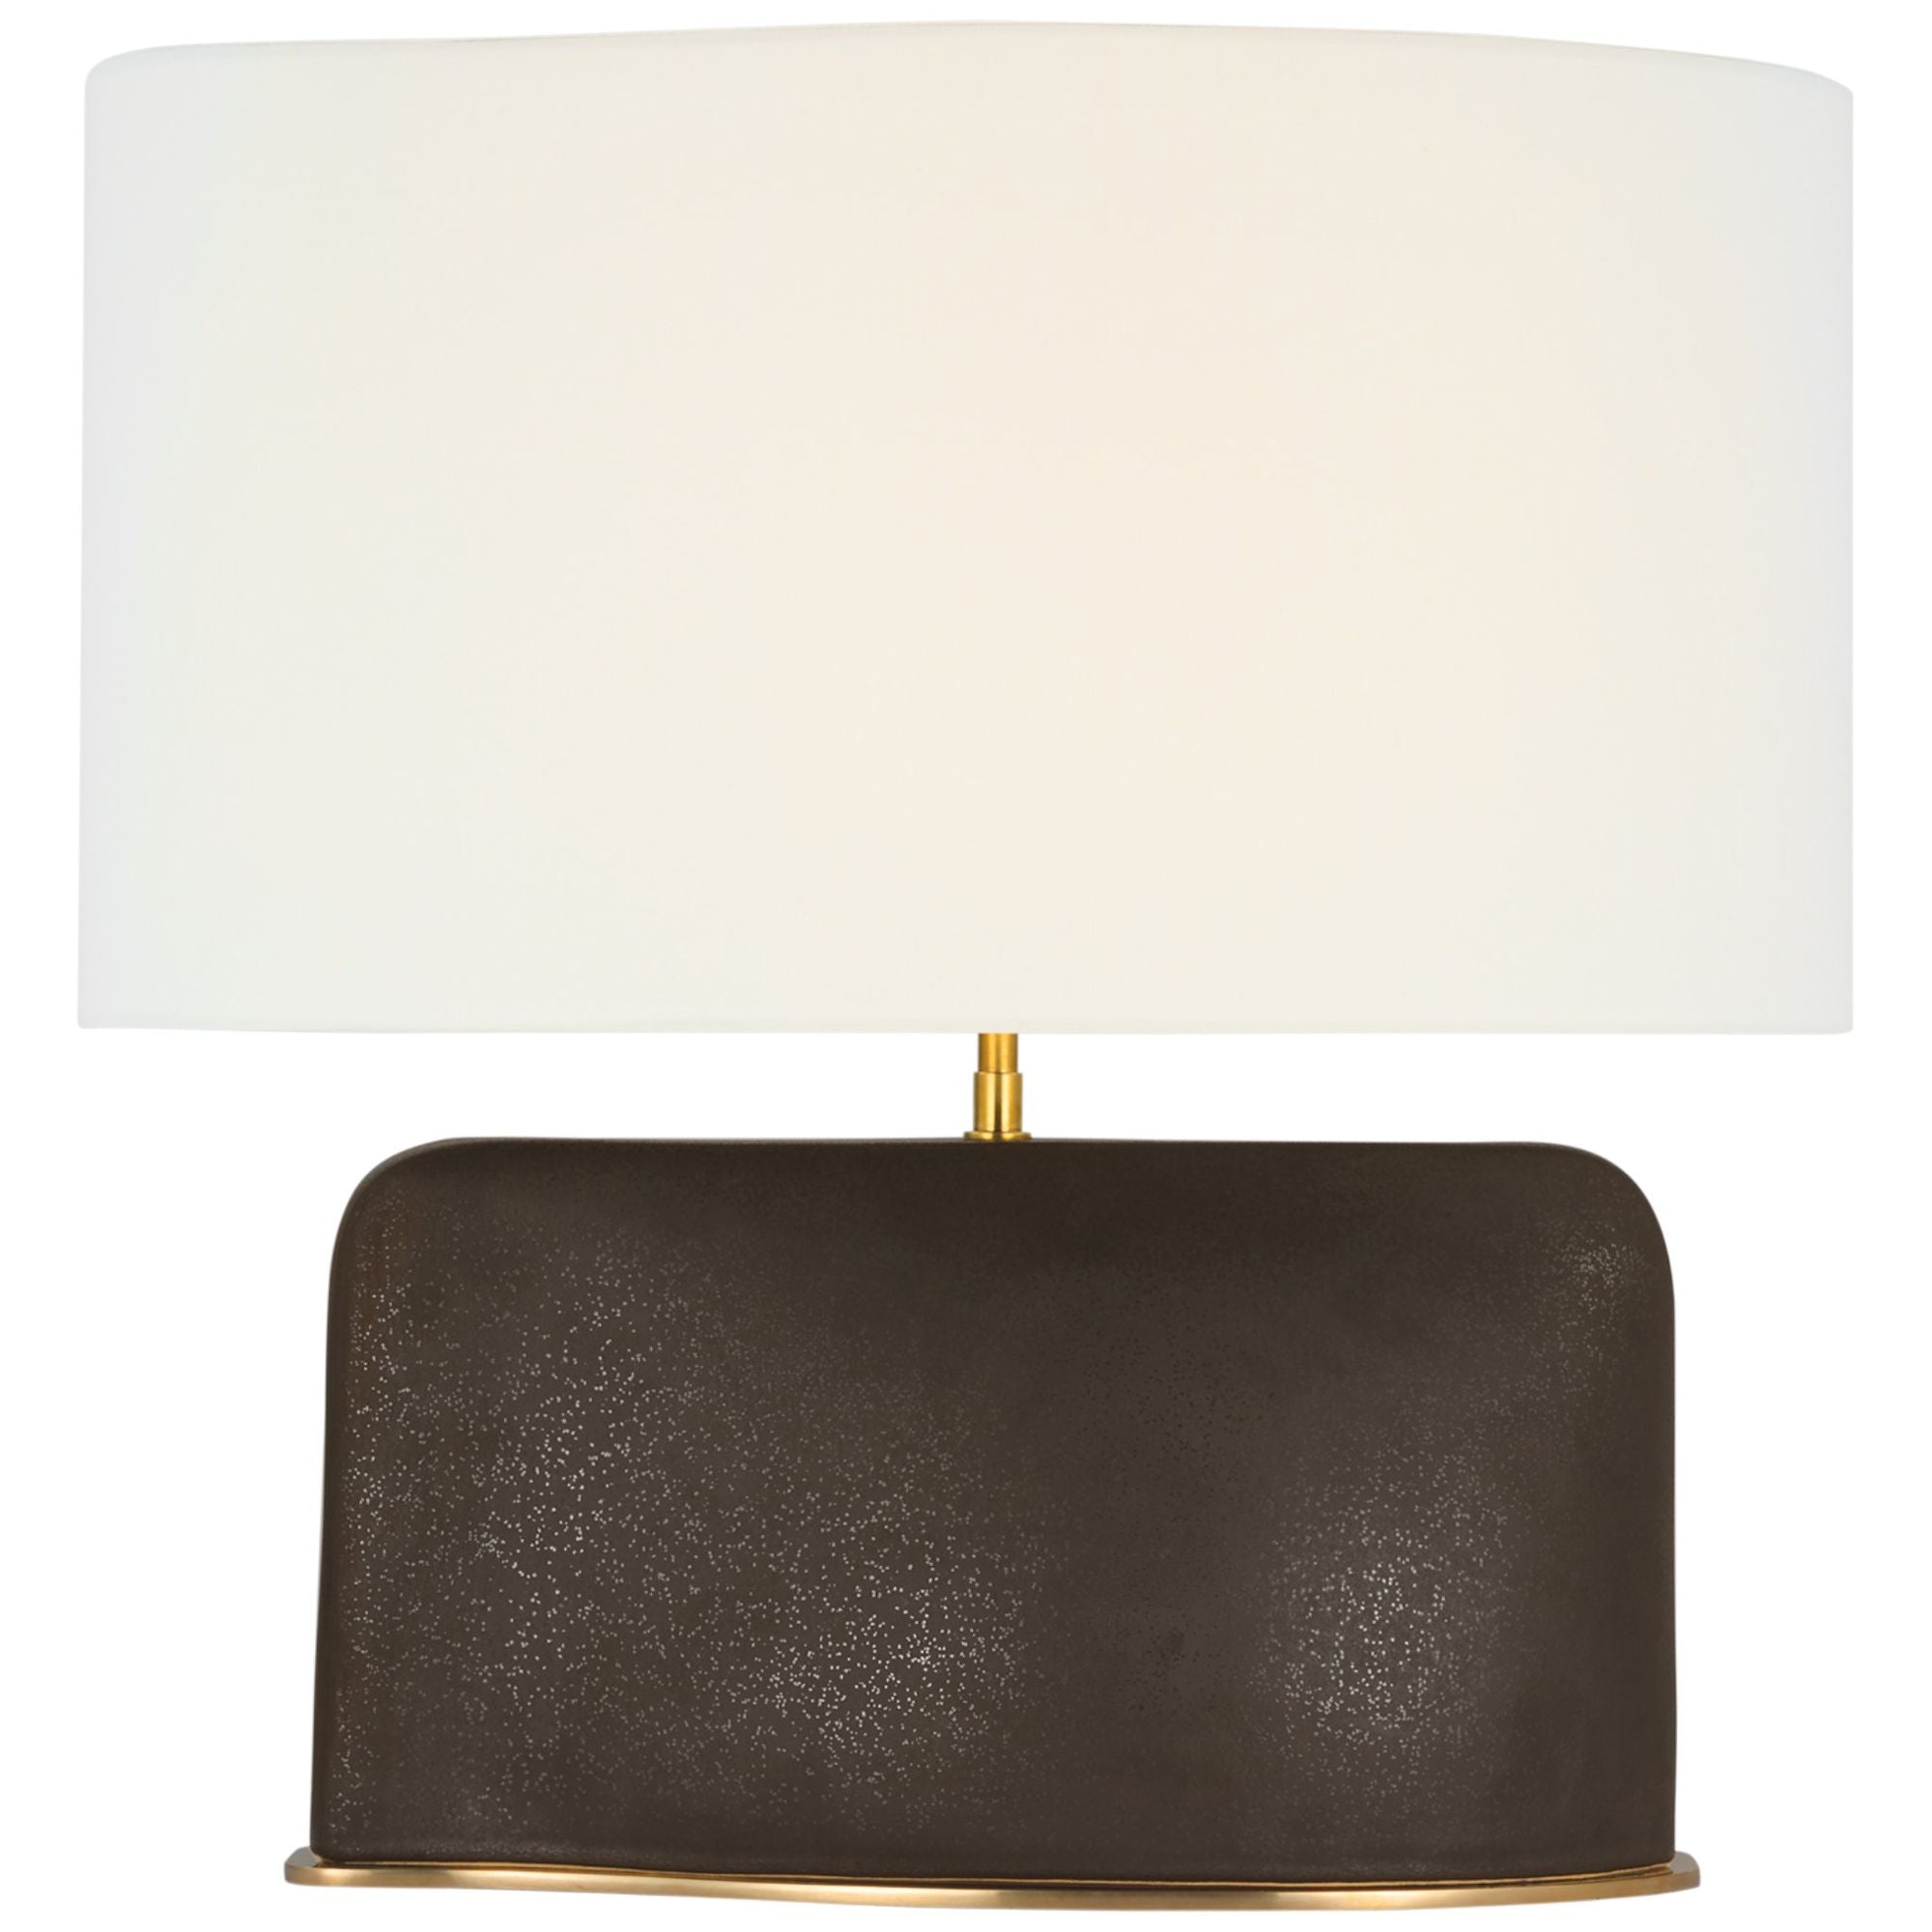 Kelly Wearstler Amantani Medium Sculpted Form Table Lamp in Stained Black Metallic with Linen Shade